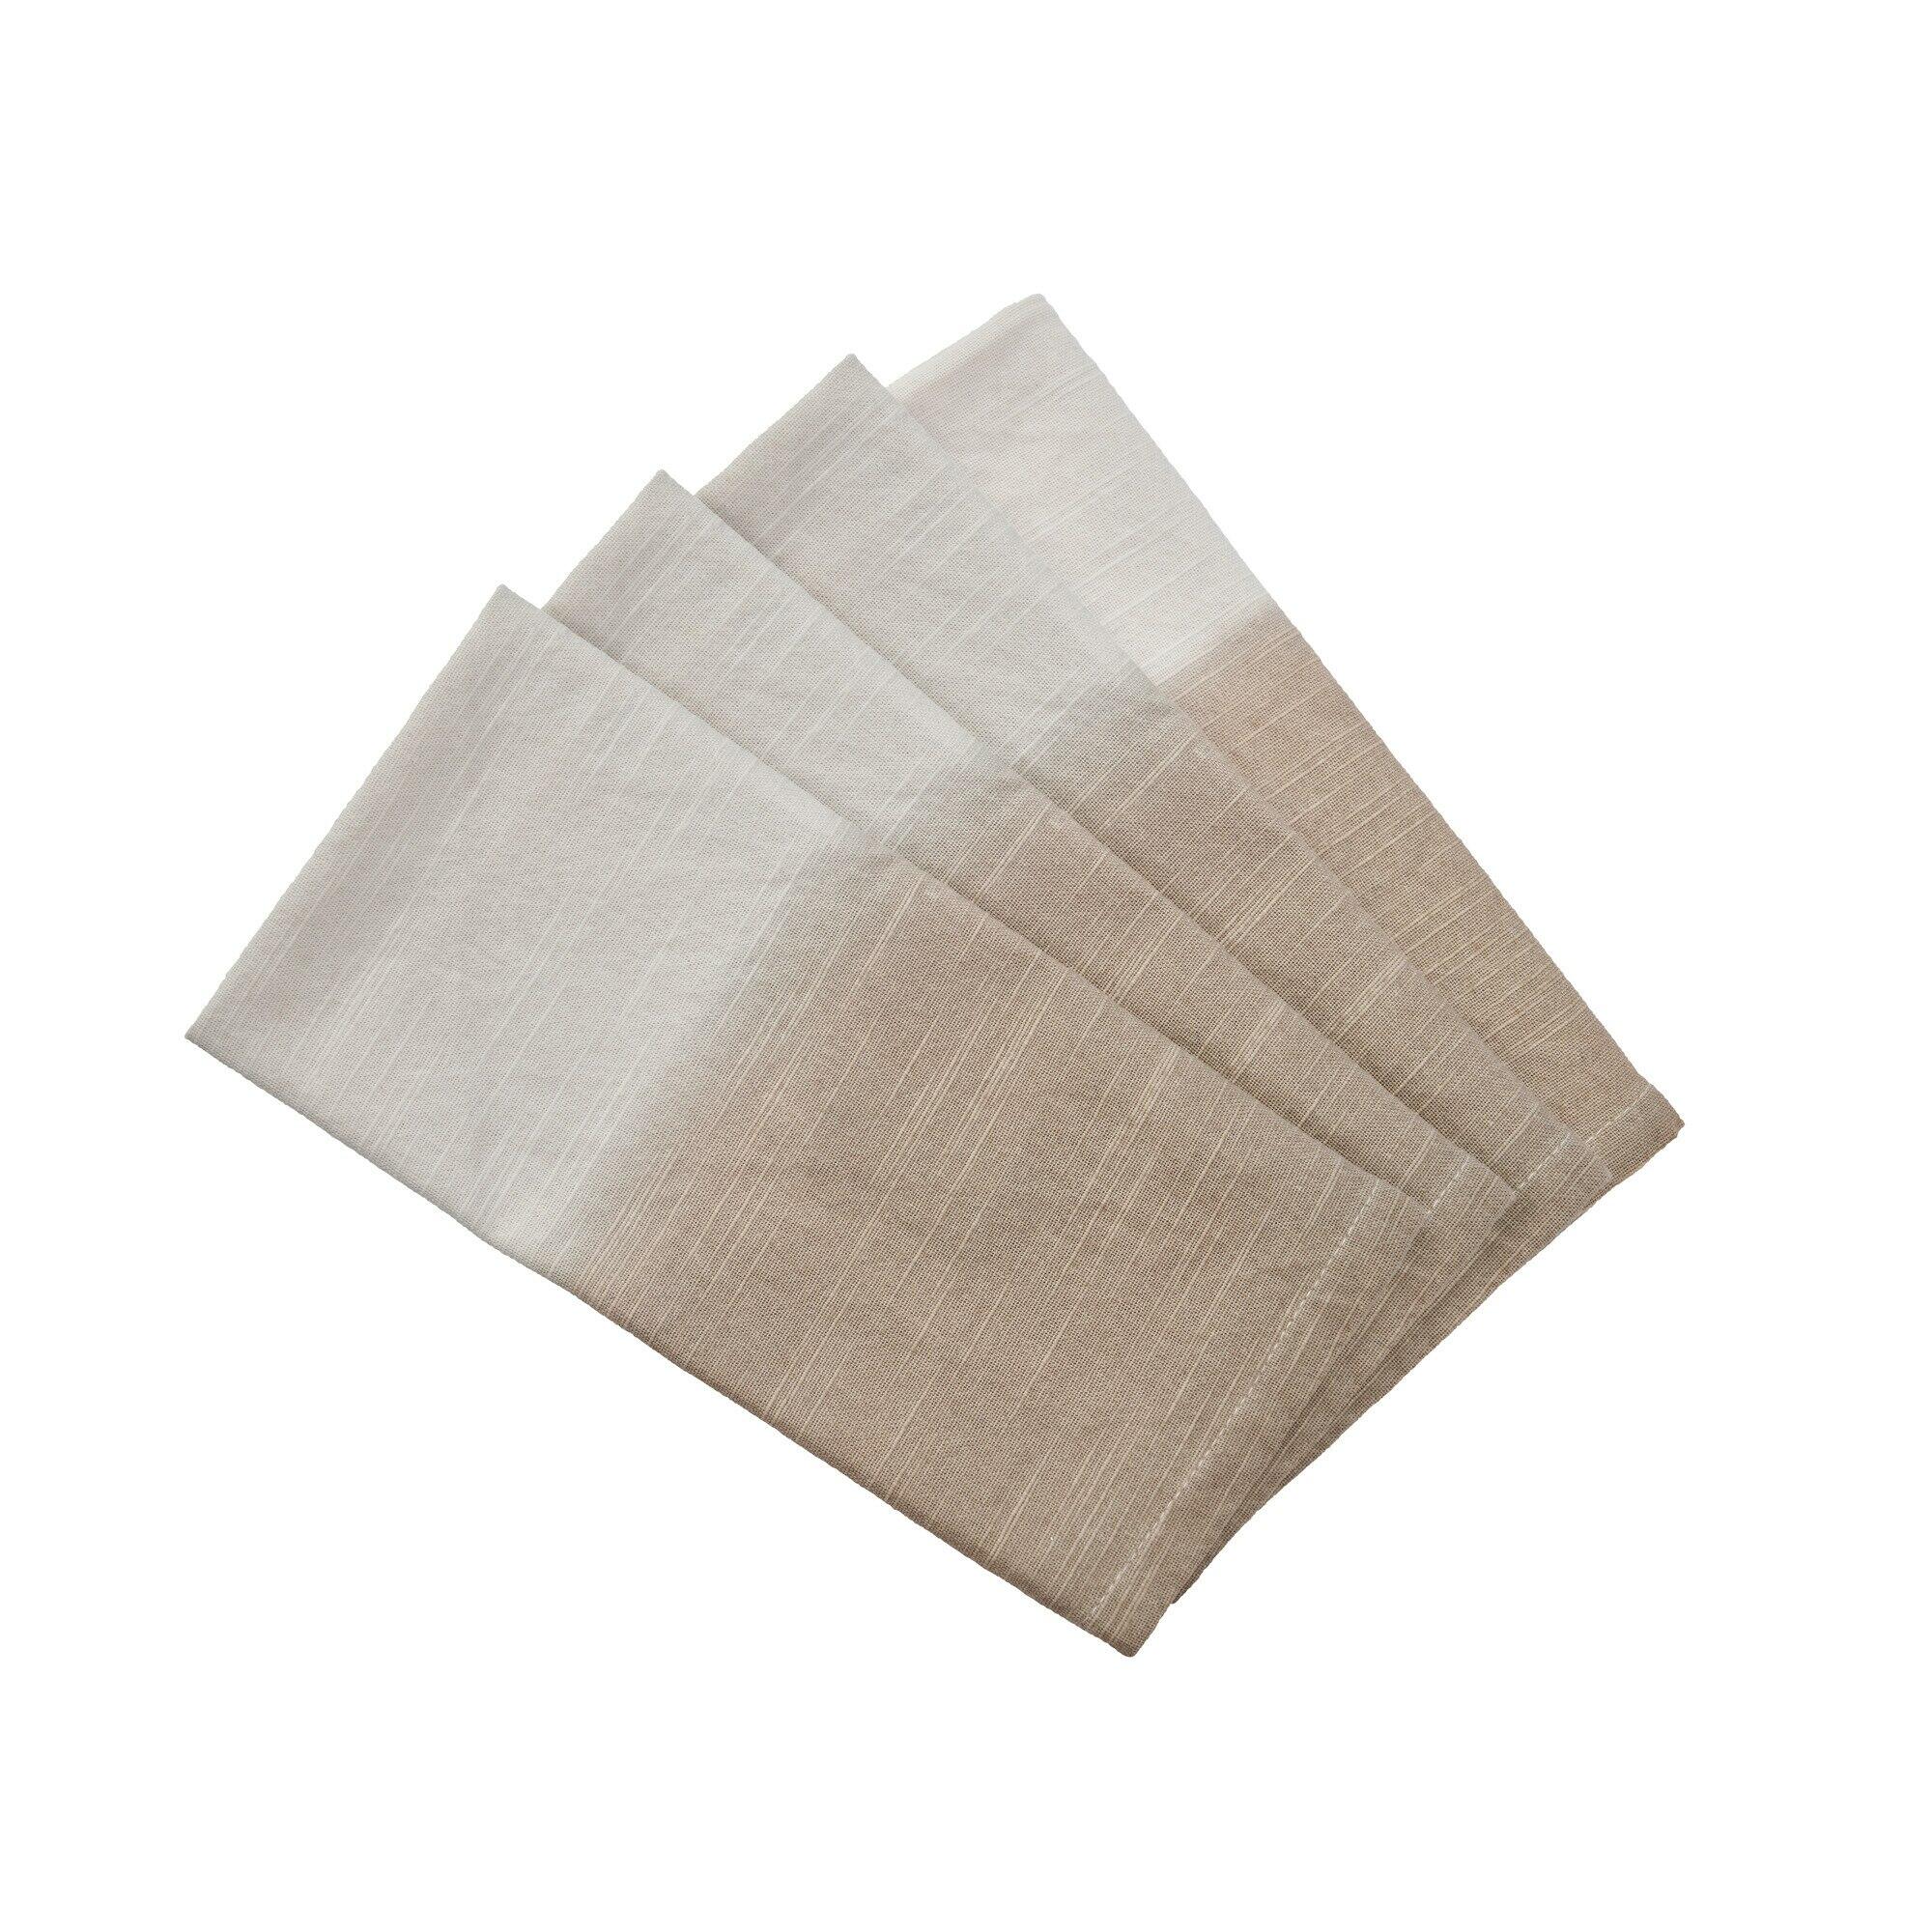 Set Of 4 Neutral Ombre Napkins by Denby